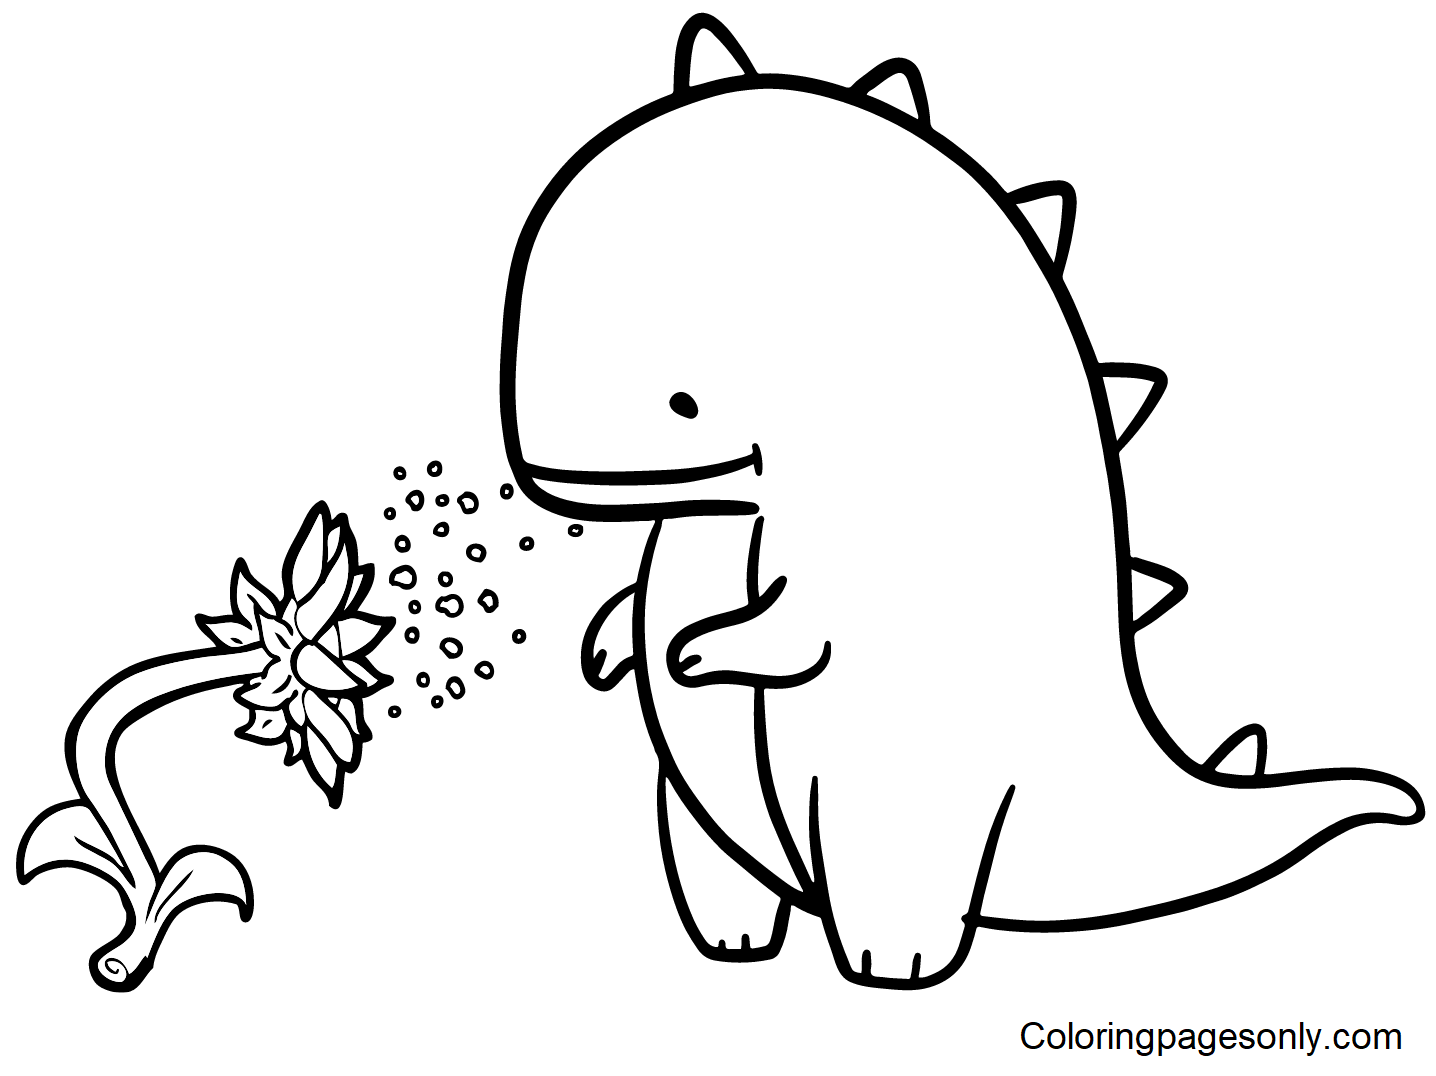 Adovable Dinosaur with Flower Coloring Pages